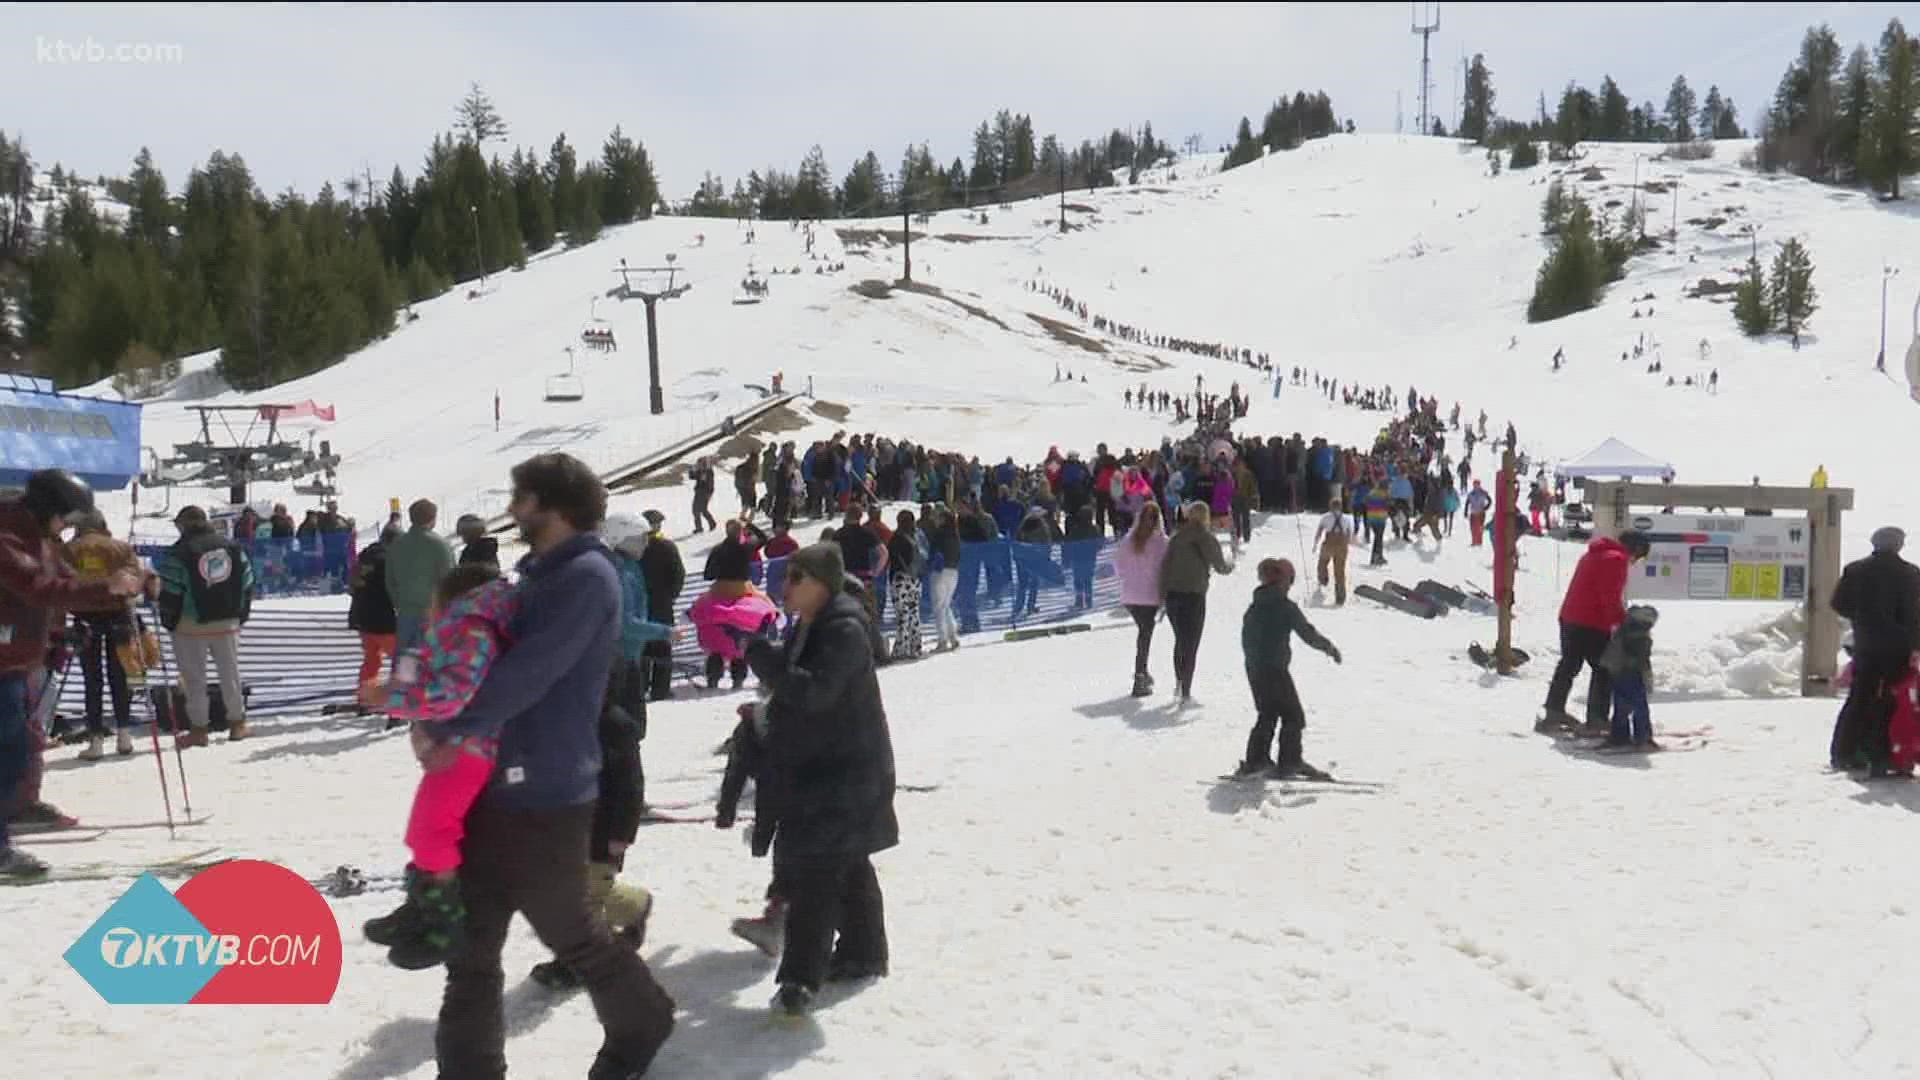 Bogus Basin will reopen for 'Supply Chain Saturday' on April 16 following 20 inches of late-season snow.